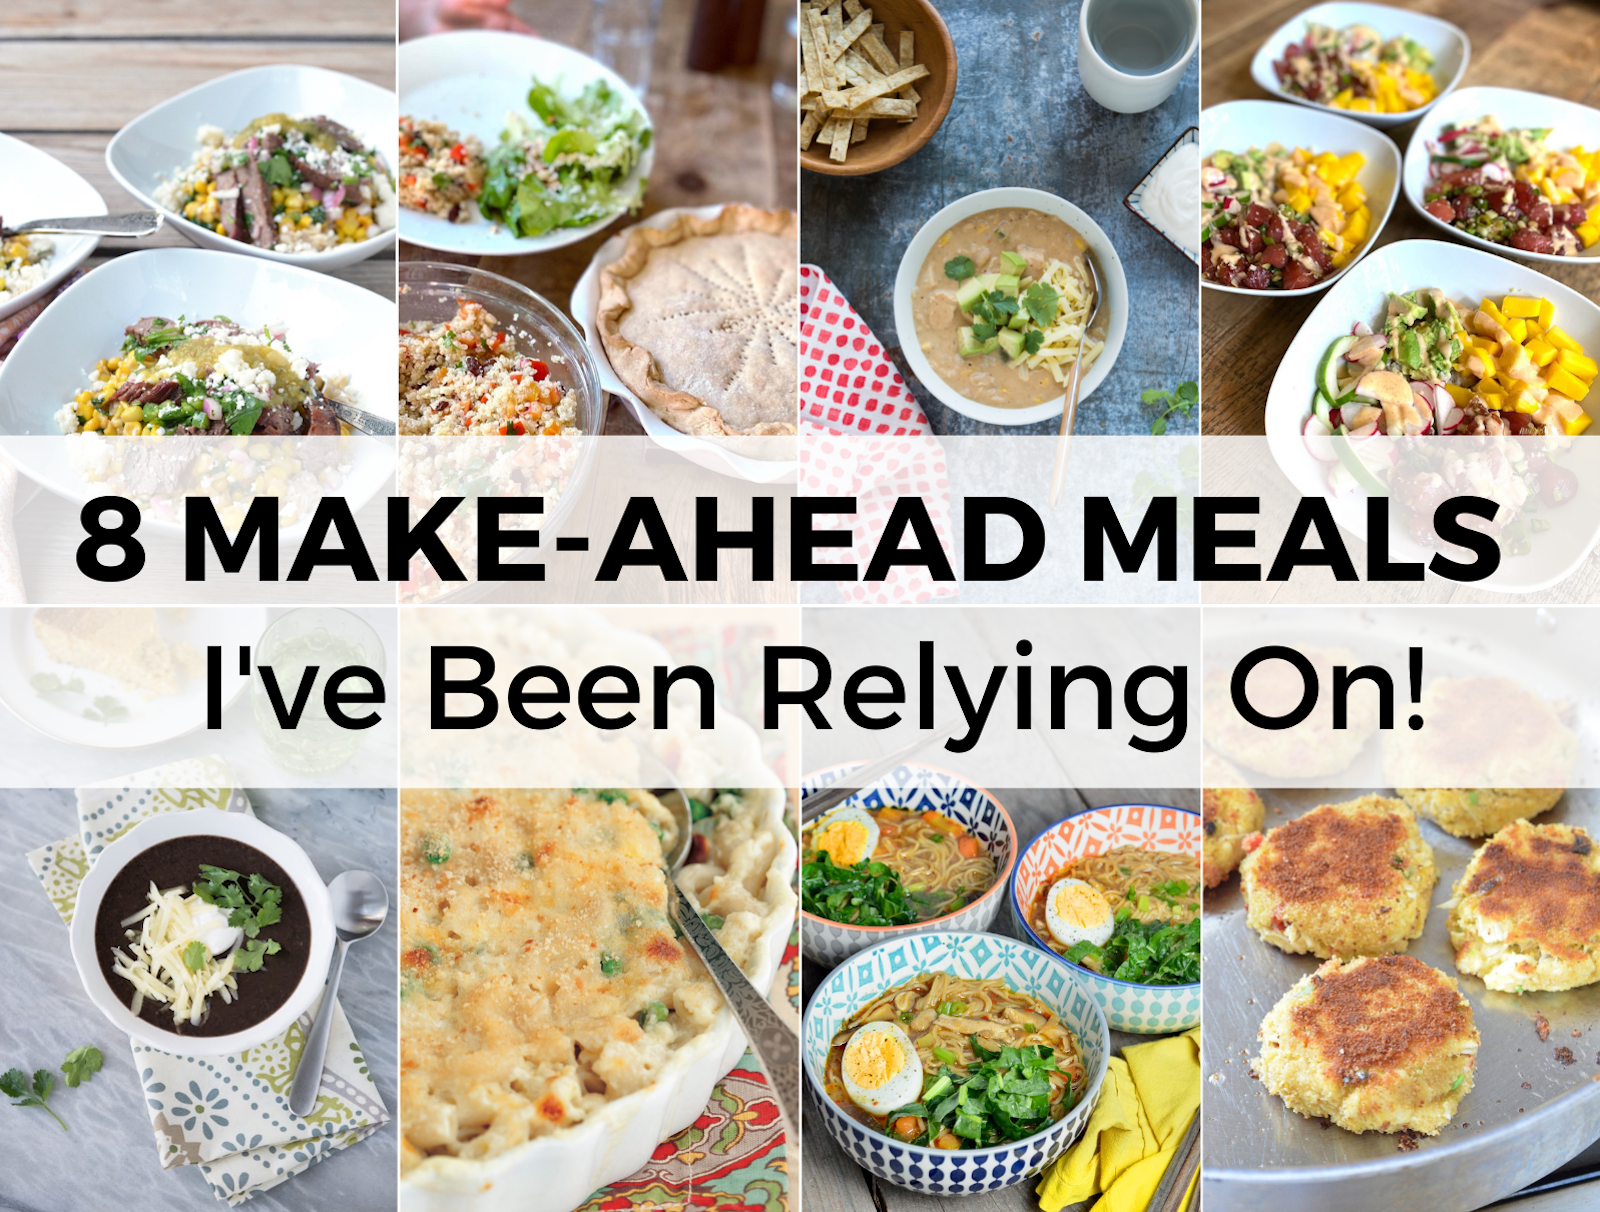 8 images of make-ahead meals. 